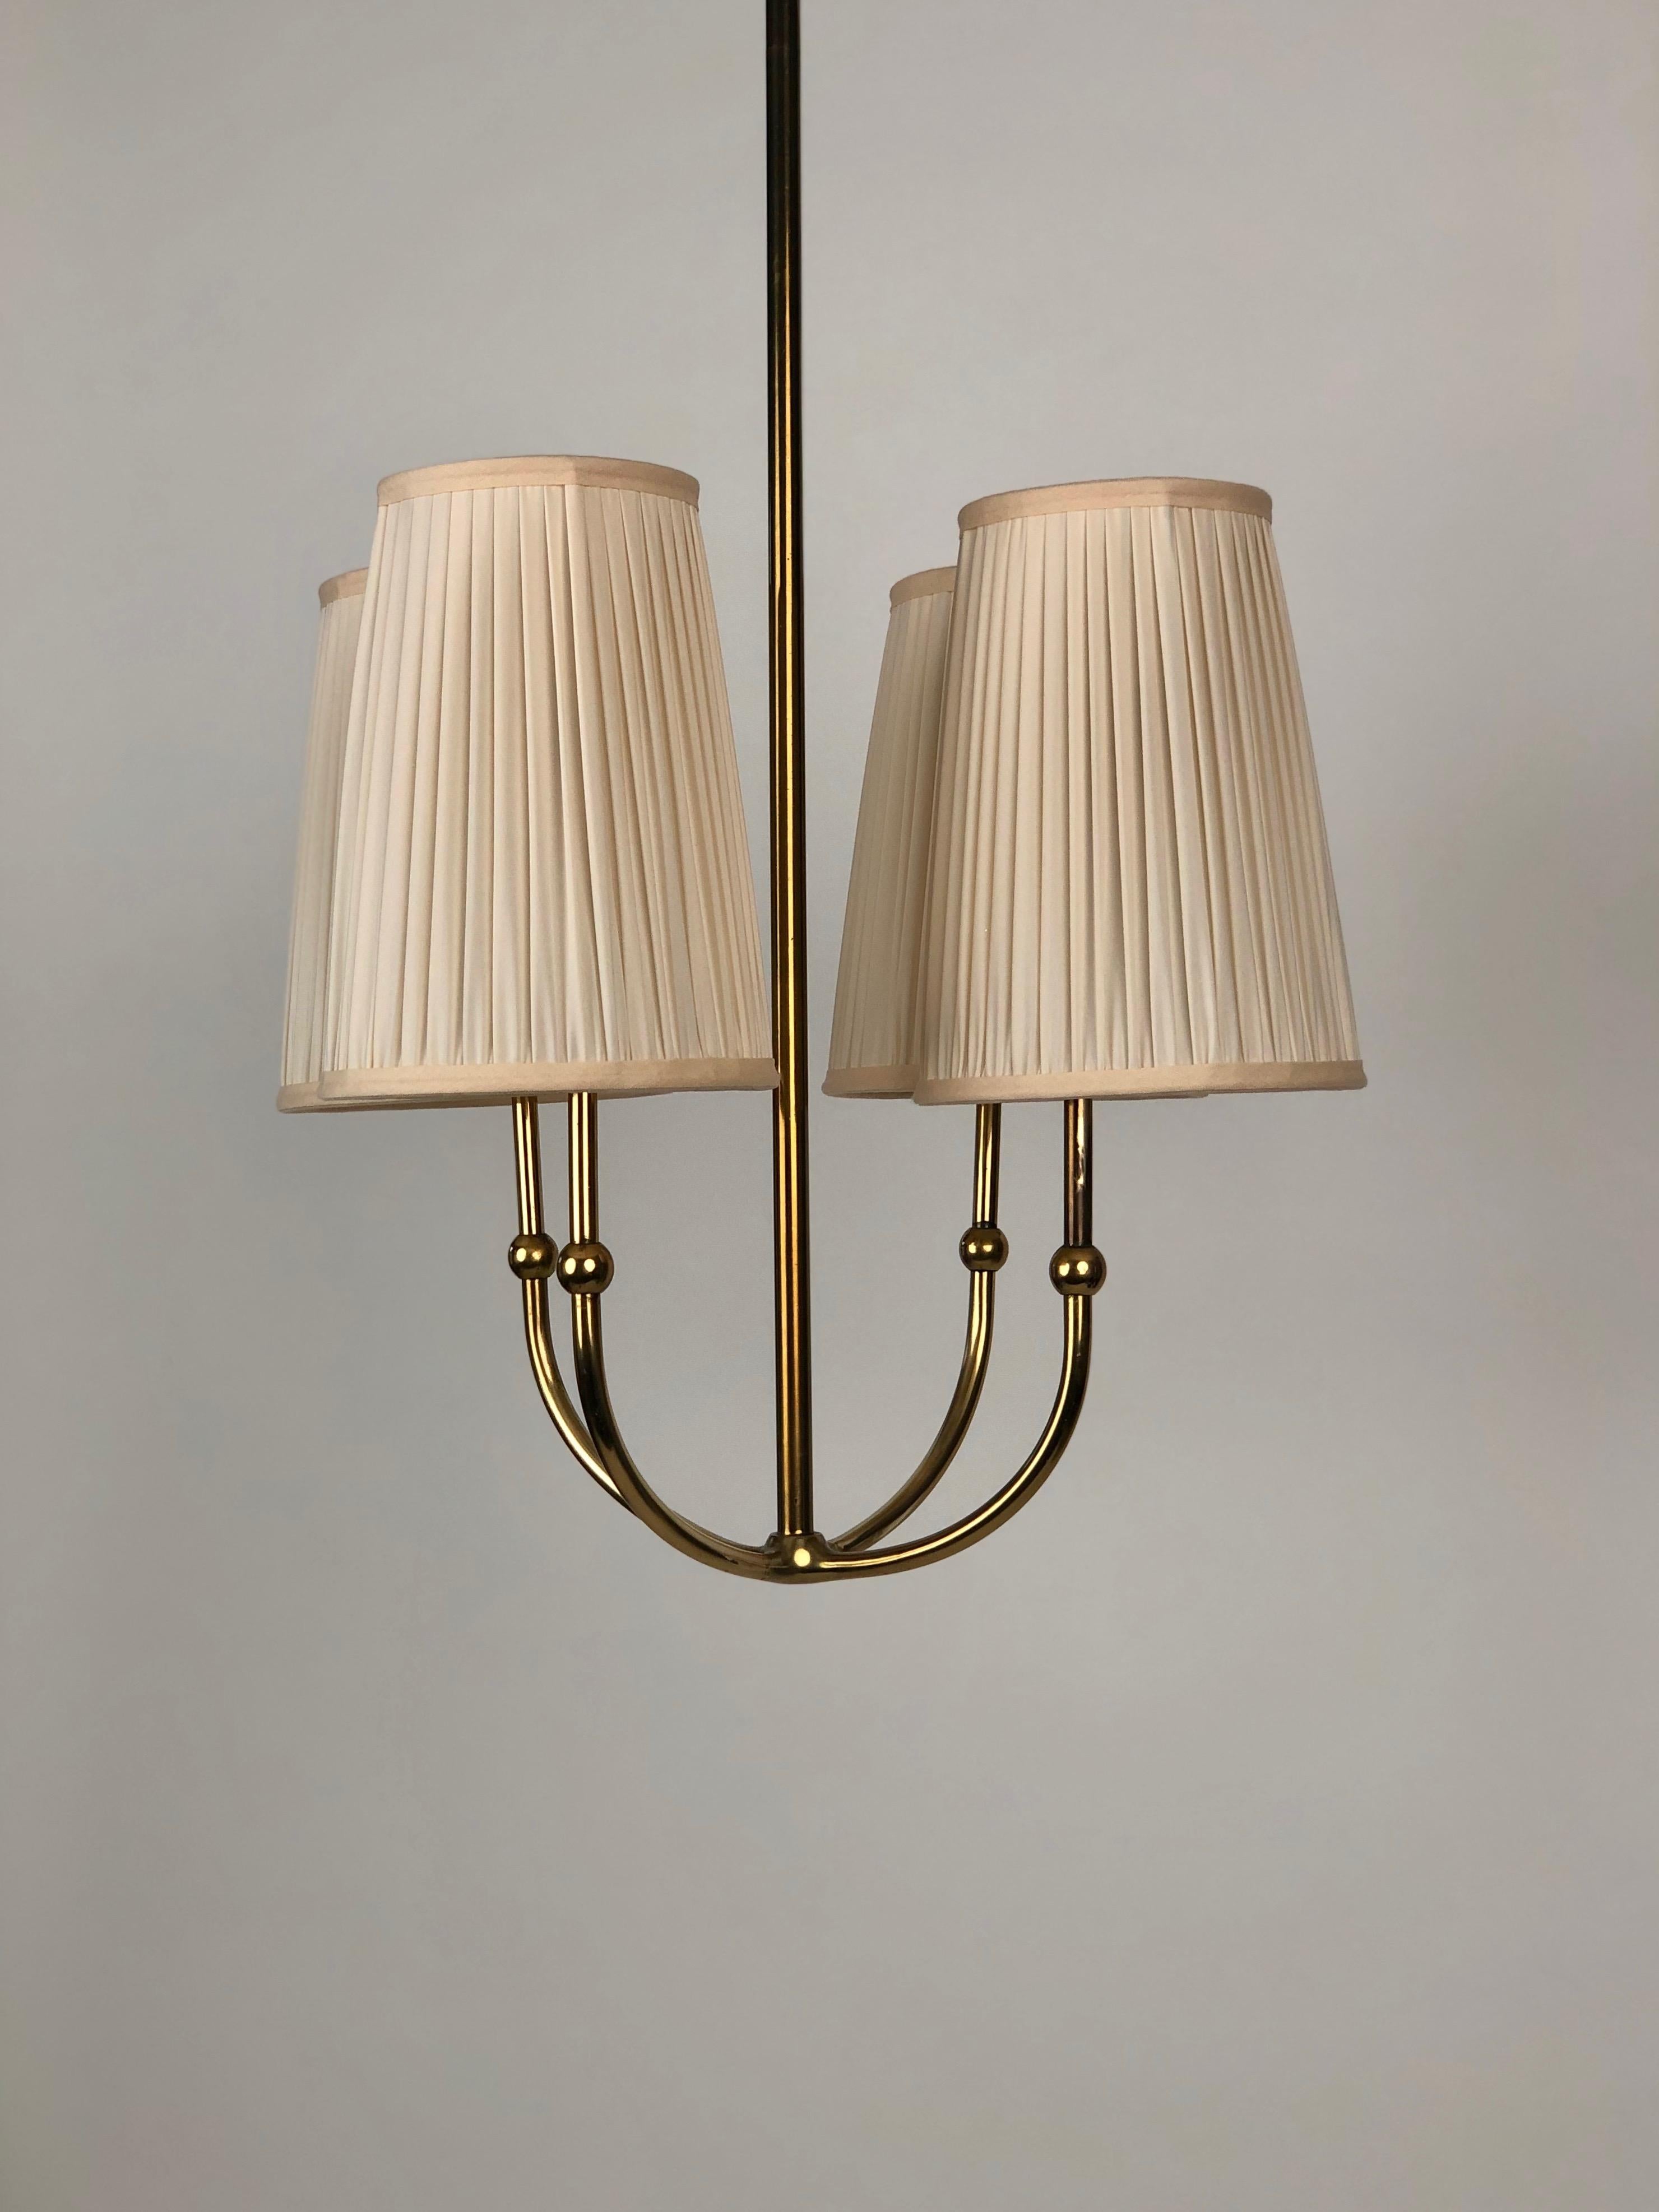 This is a beautifully proportioned brass chandelier from the 1930's, with a poetic form . 
I find it simply: Wow.
The relationship of the various elements and their proportions make it sing in the right environment .
The shades have been revitalised